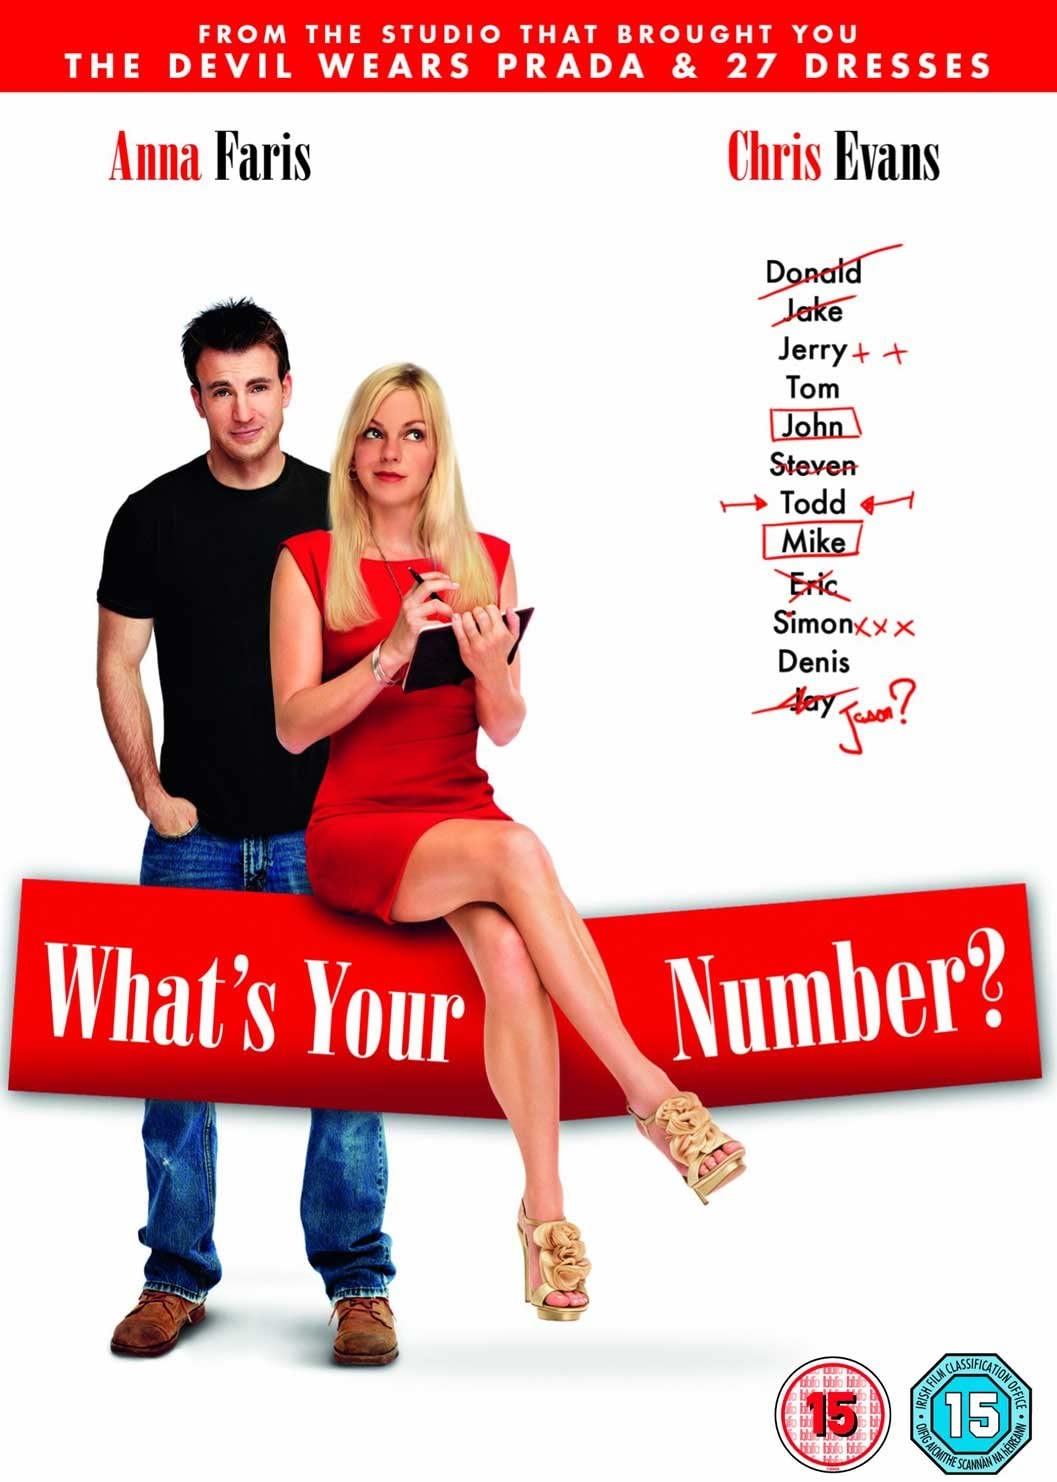 What's Your Number? (DVD)